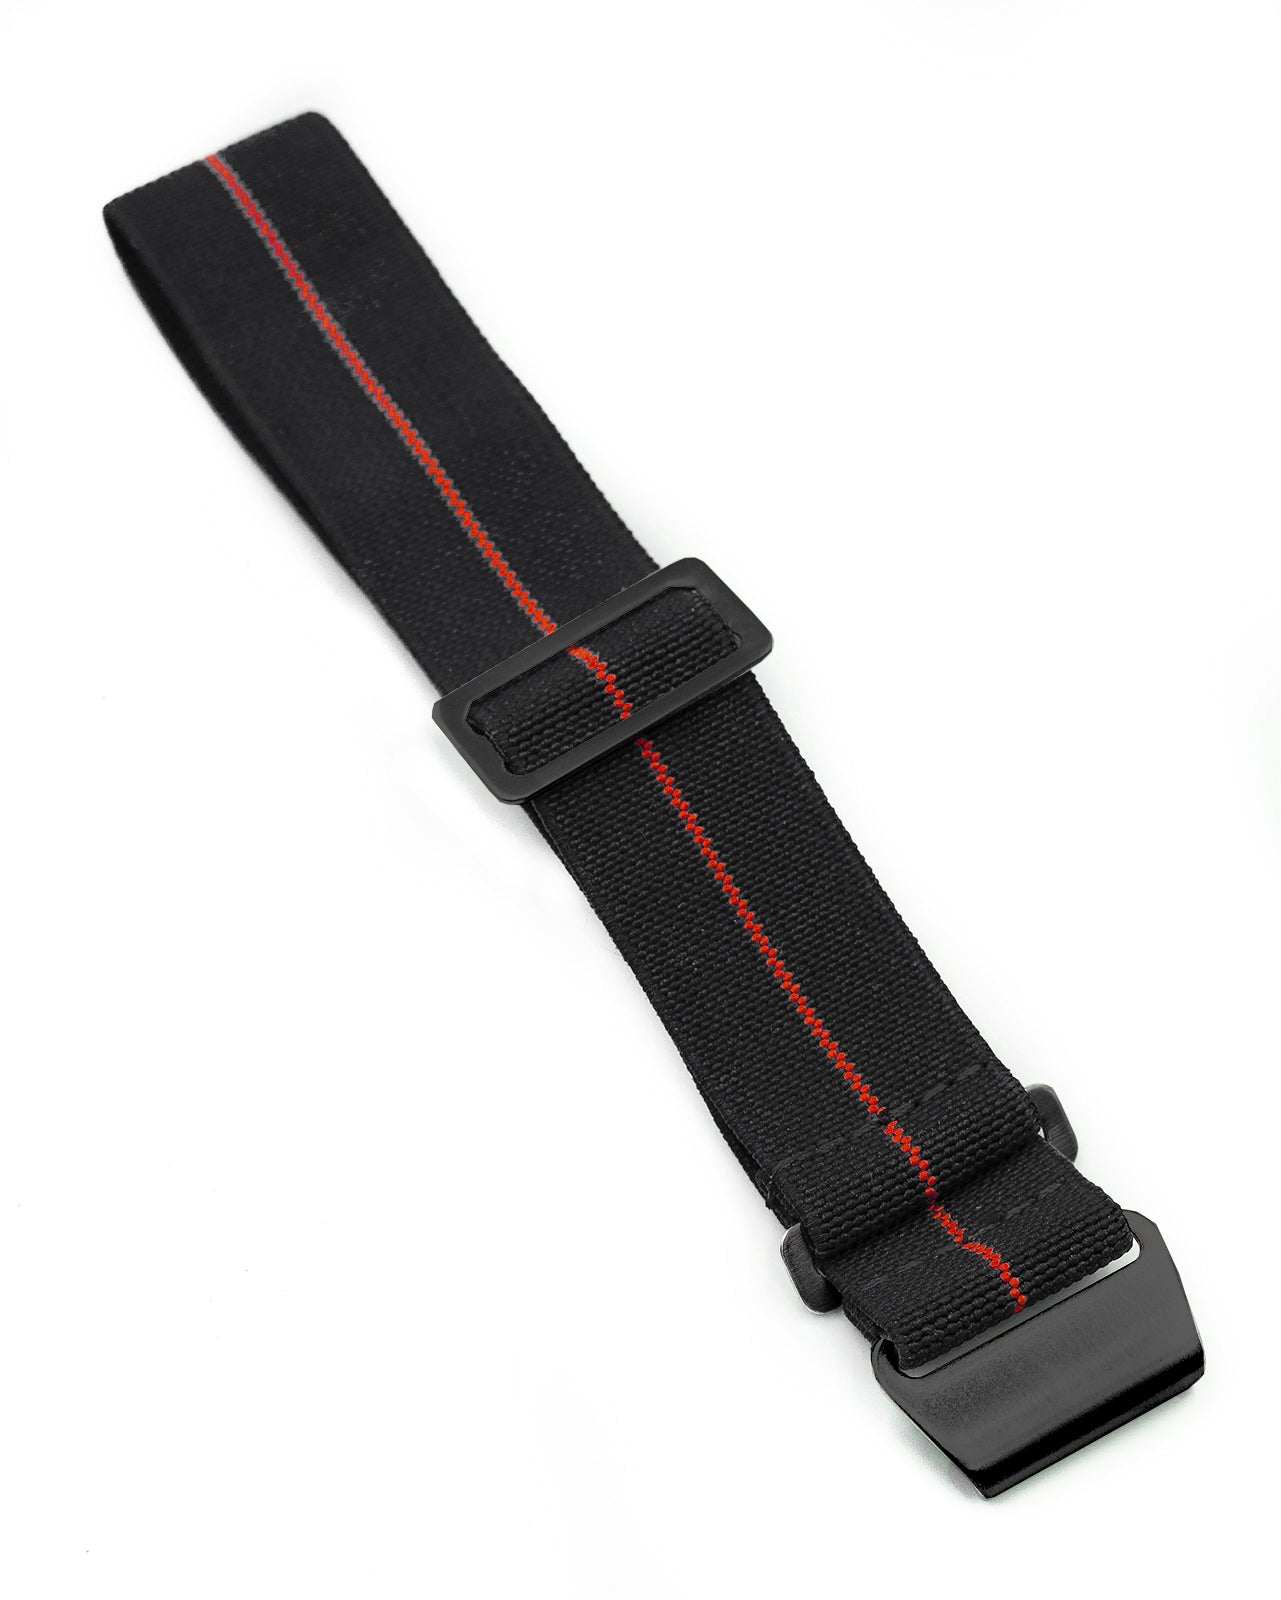 PARA Elastic (Stealth) - Black with Red Centerline